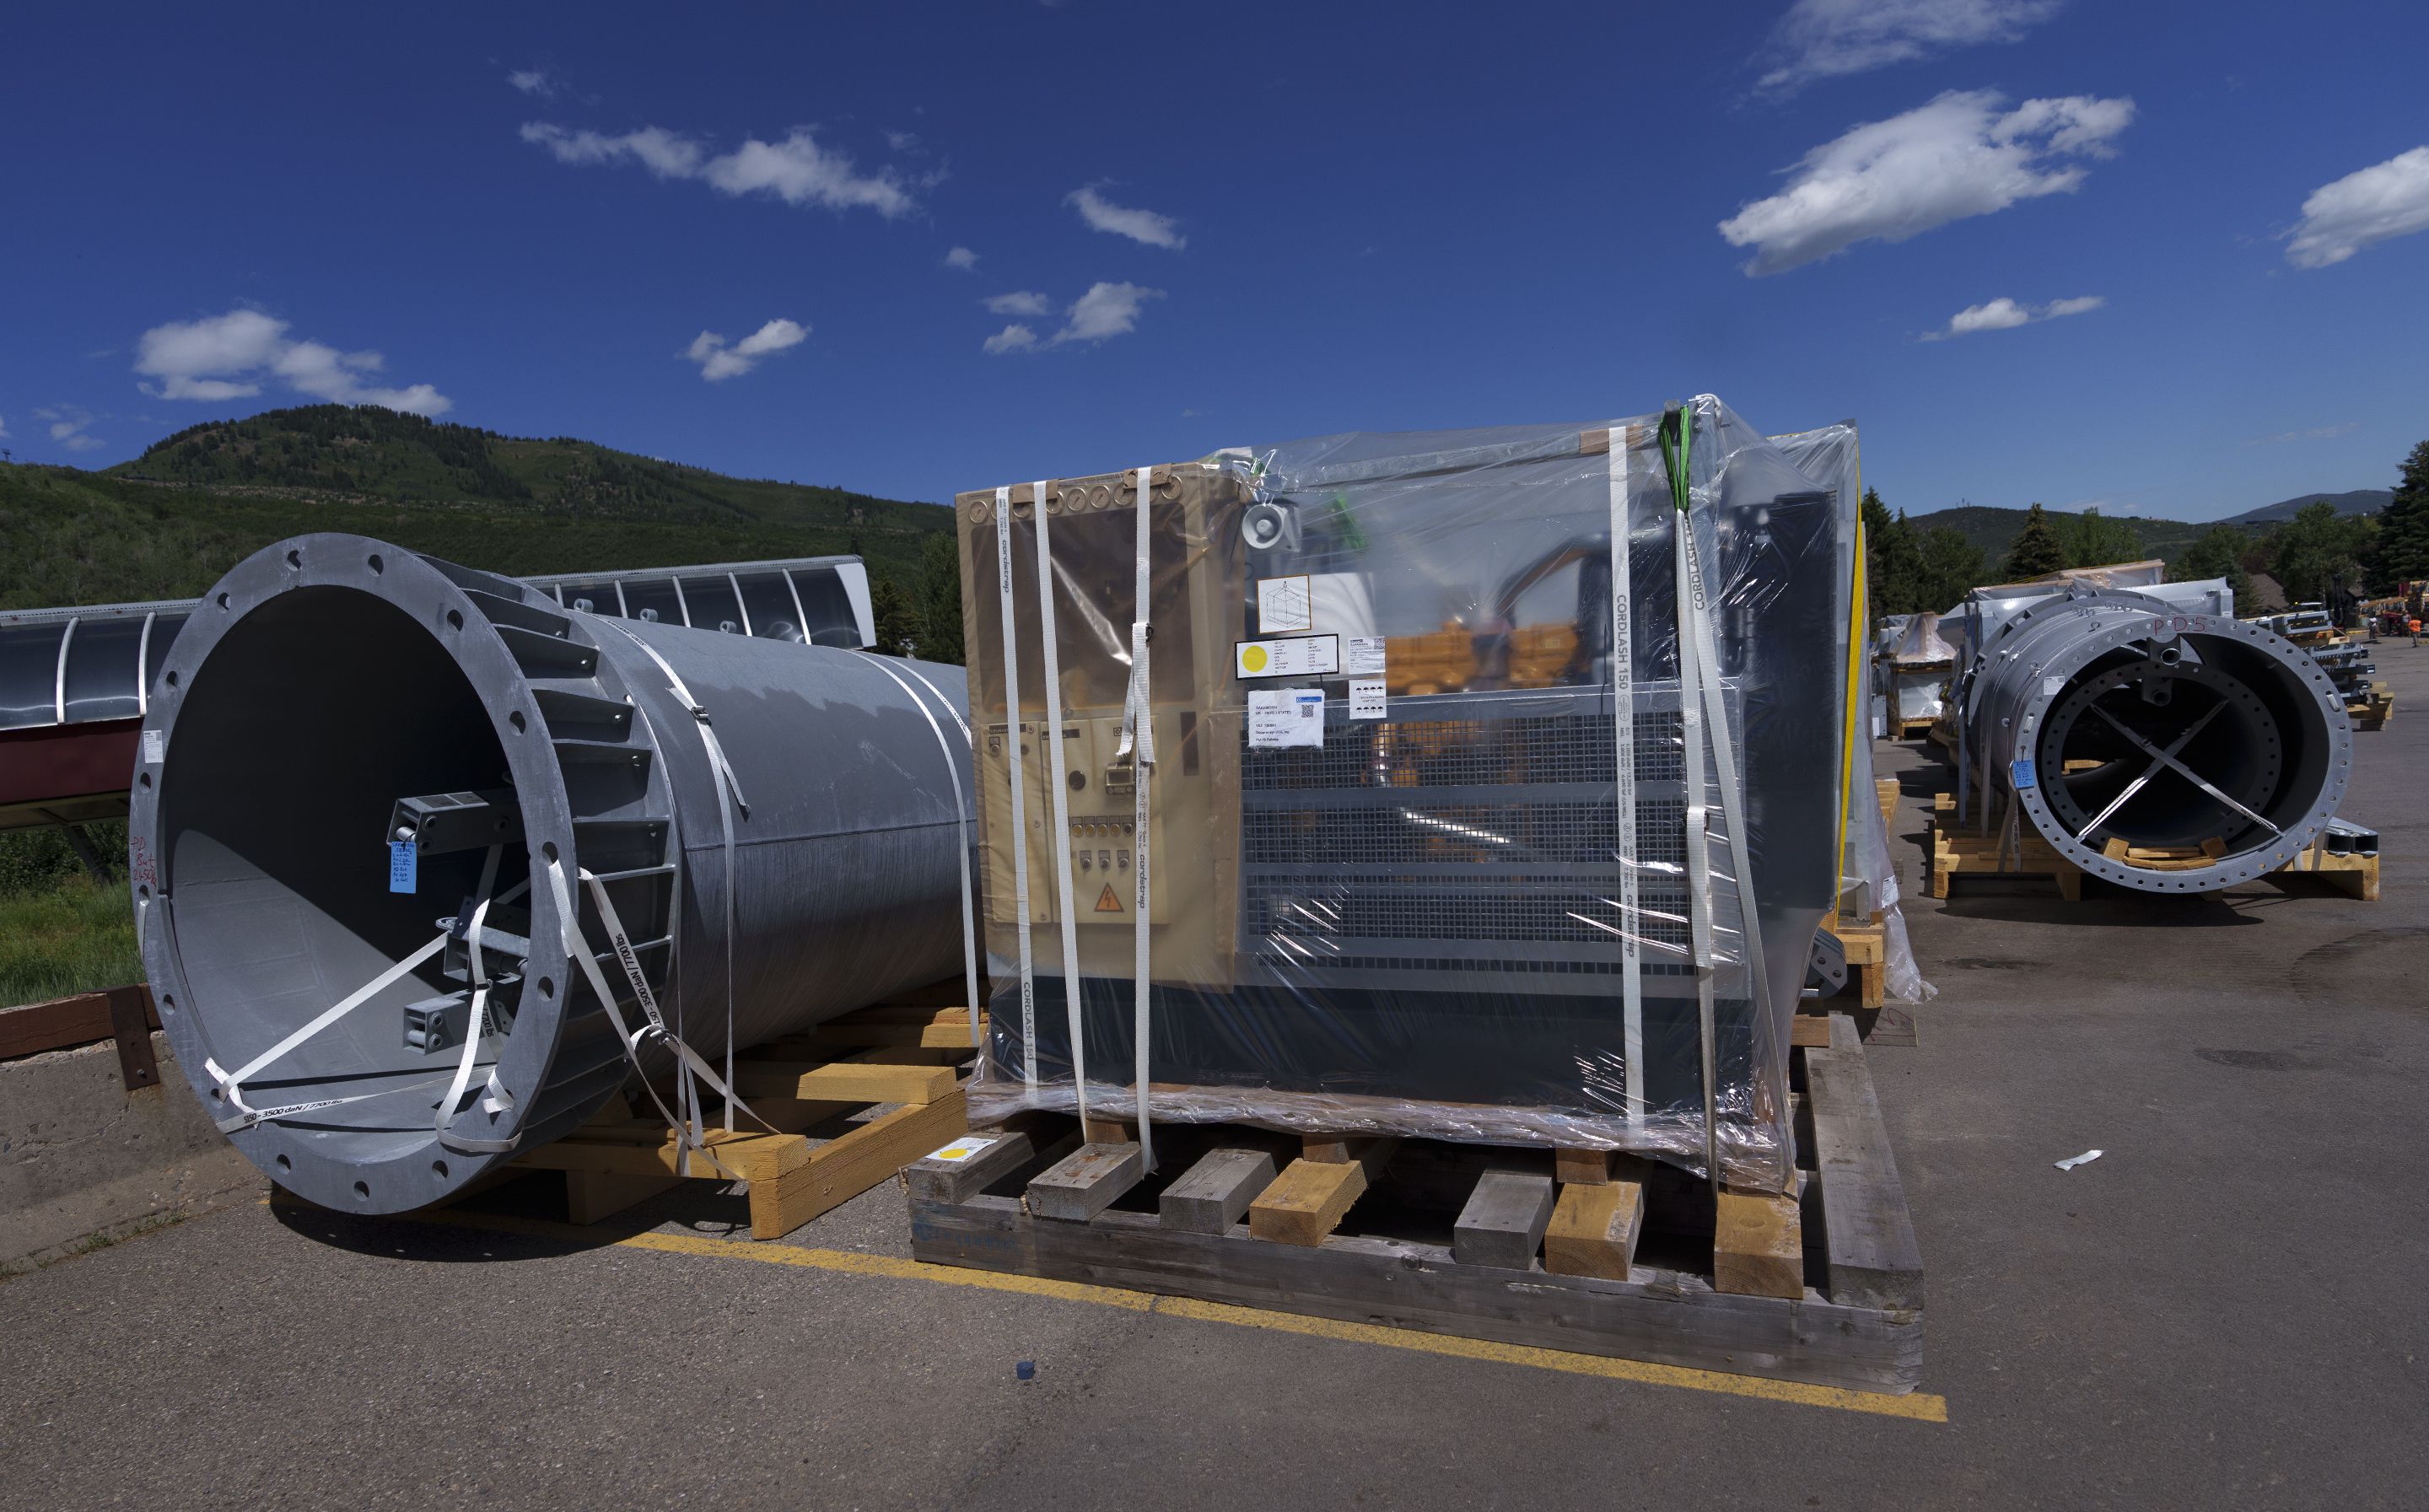 (Leah Hogsten | The Salt Lake Tribune) Parts for building a new Eagle lift at Park City Mountain Resort lie scattered around the resorts parking lot, Thursday, July 7, 2022.  A month earlier, residents blocked the resort from being able to install the lift because of discrepancies in resort capacities by two firms. 